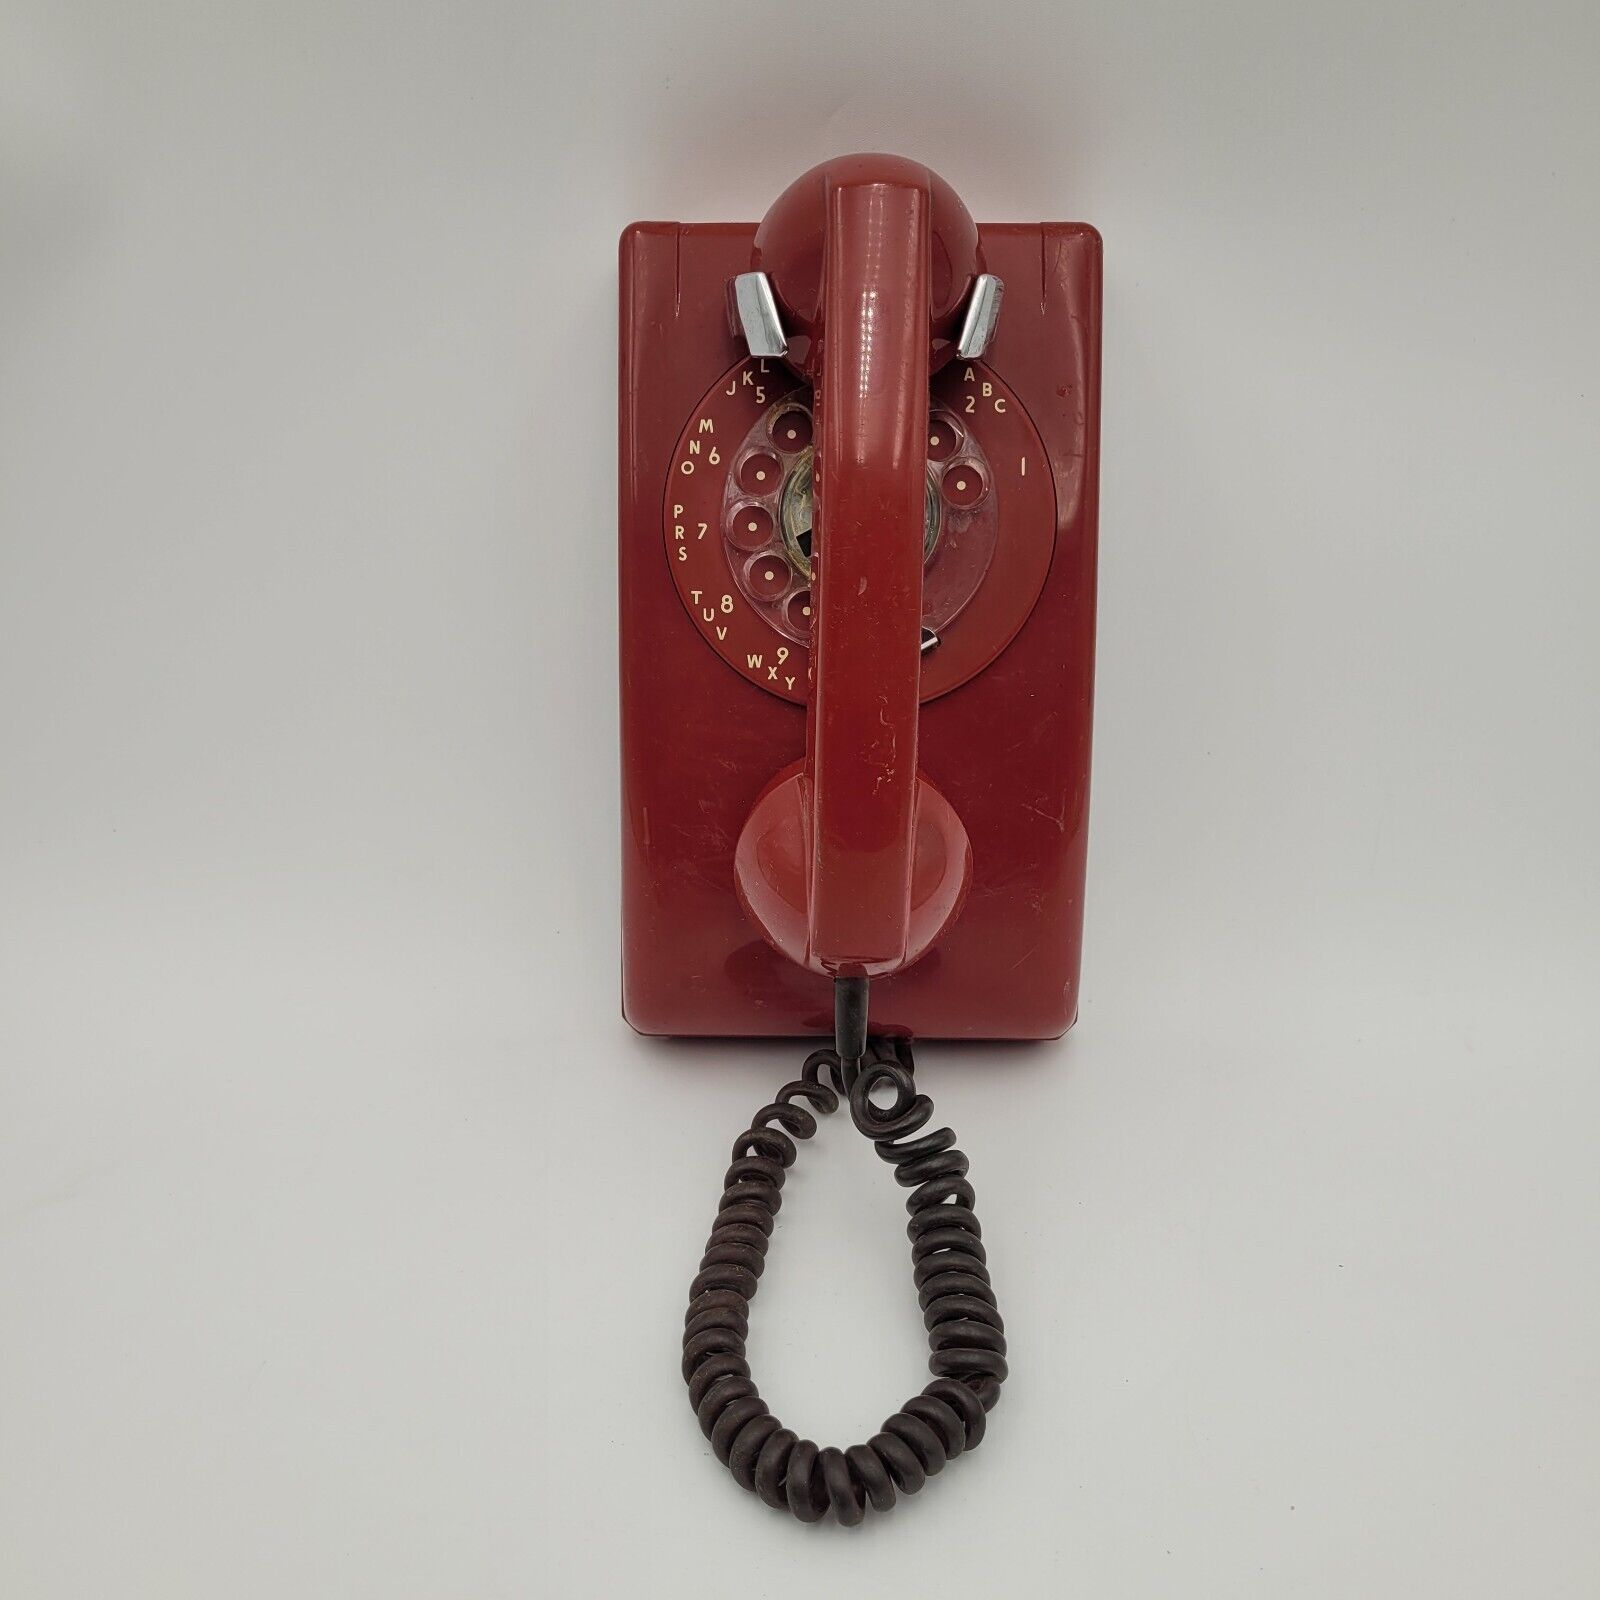 Vintage c1960s Stromberg-Carlson Wall Mount Rotary Phone Red Untested